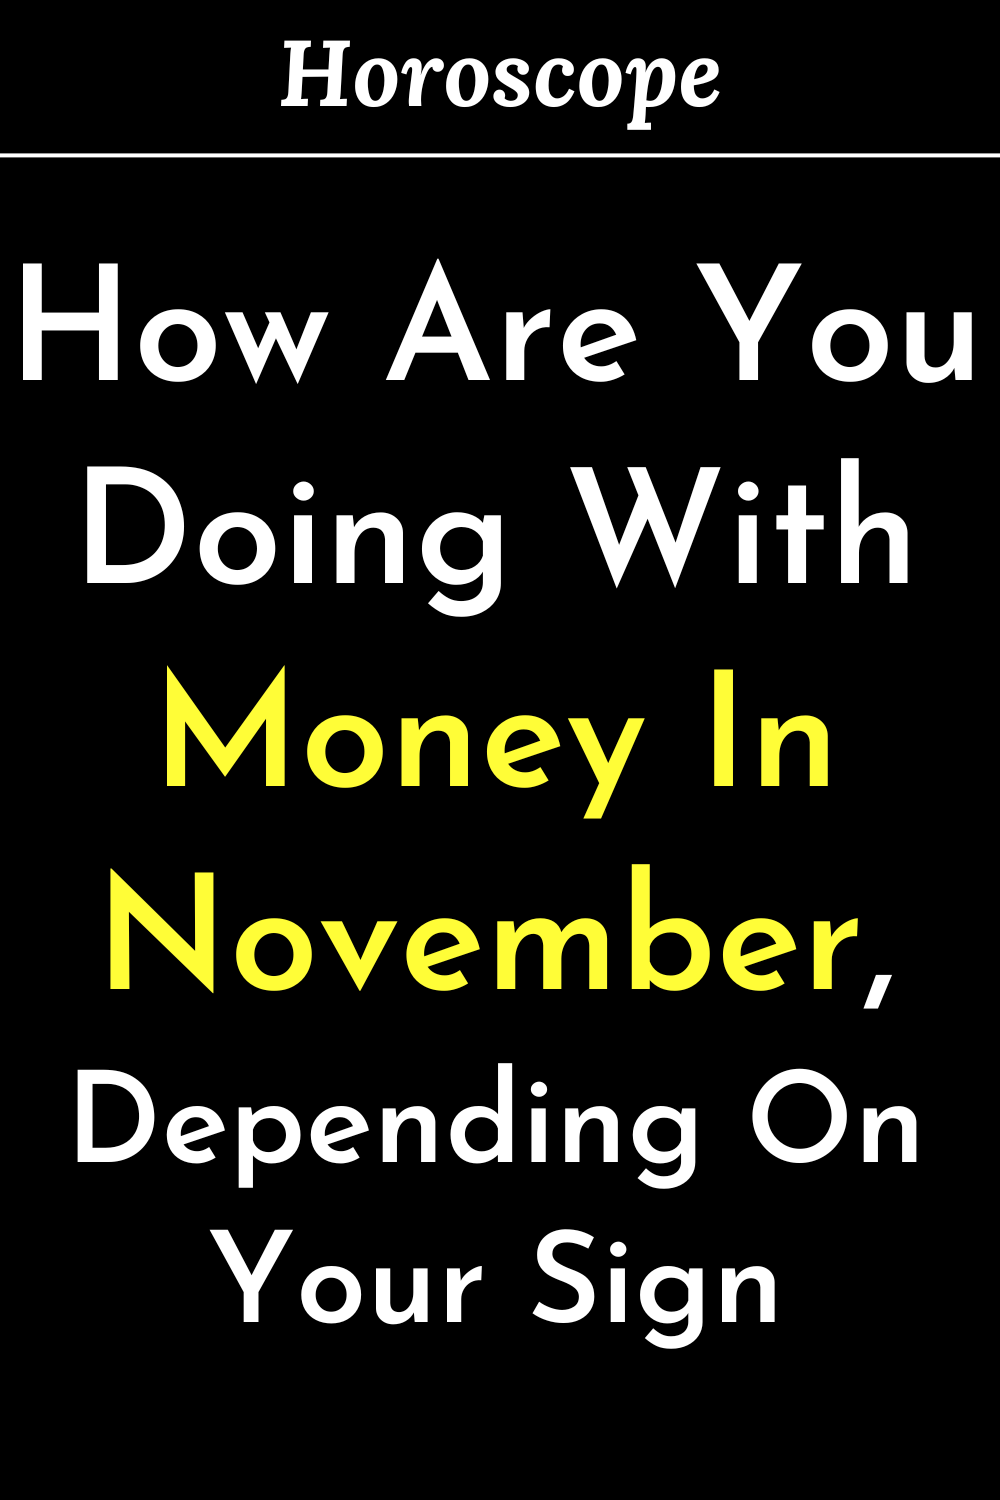 How Are You Doing With Money In November, Depending On Your Sign